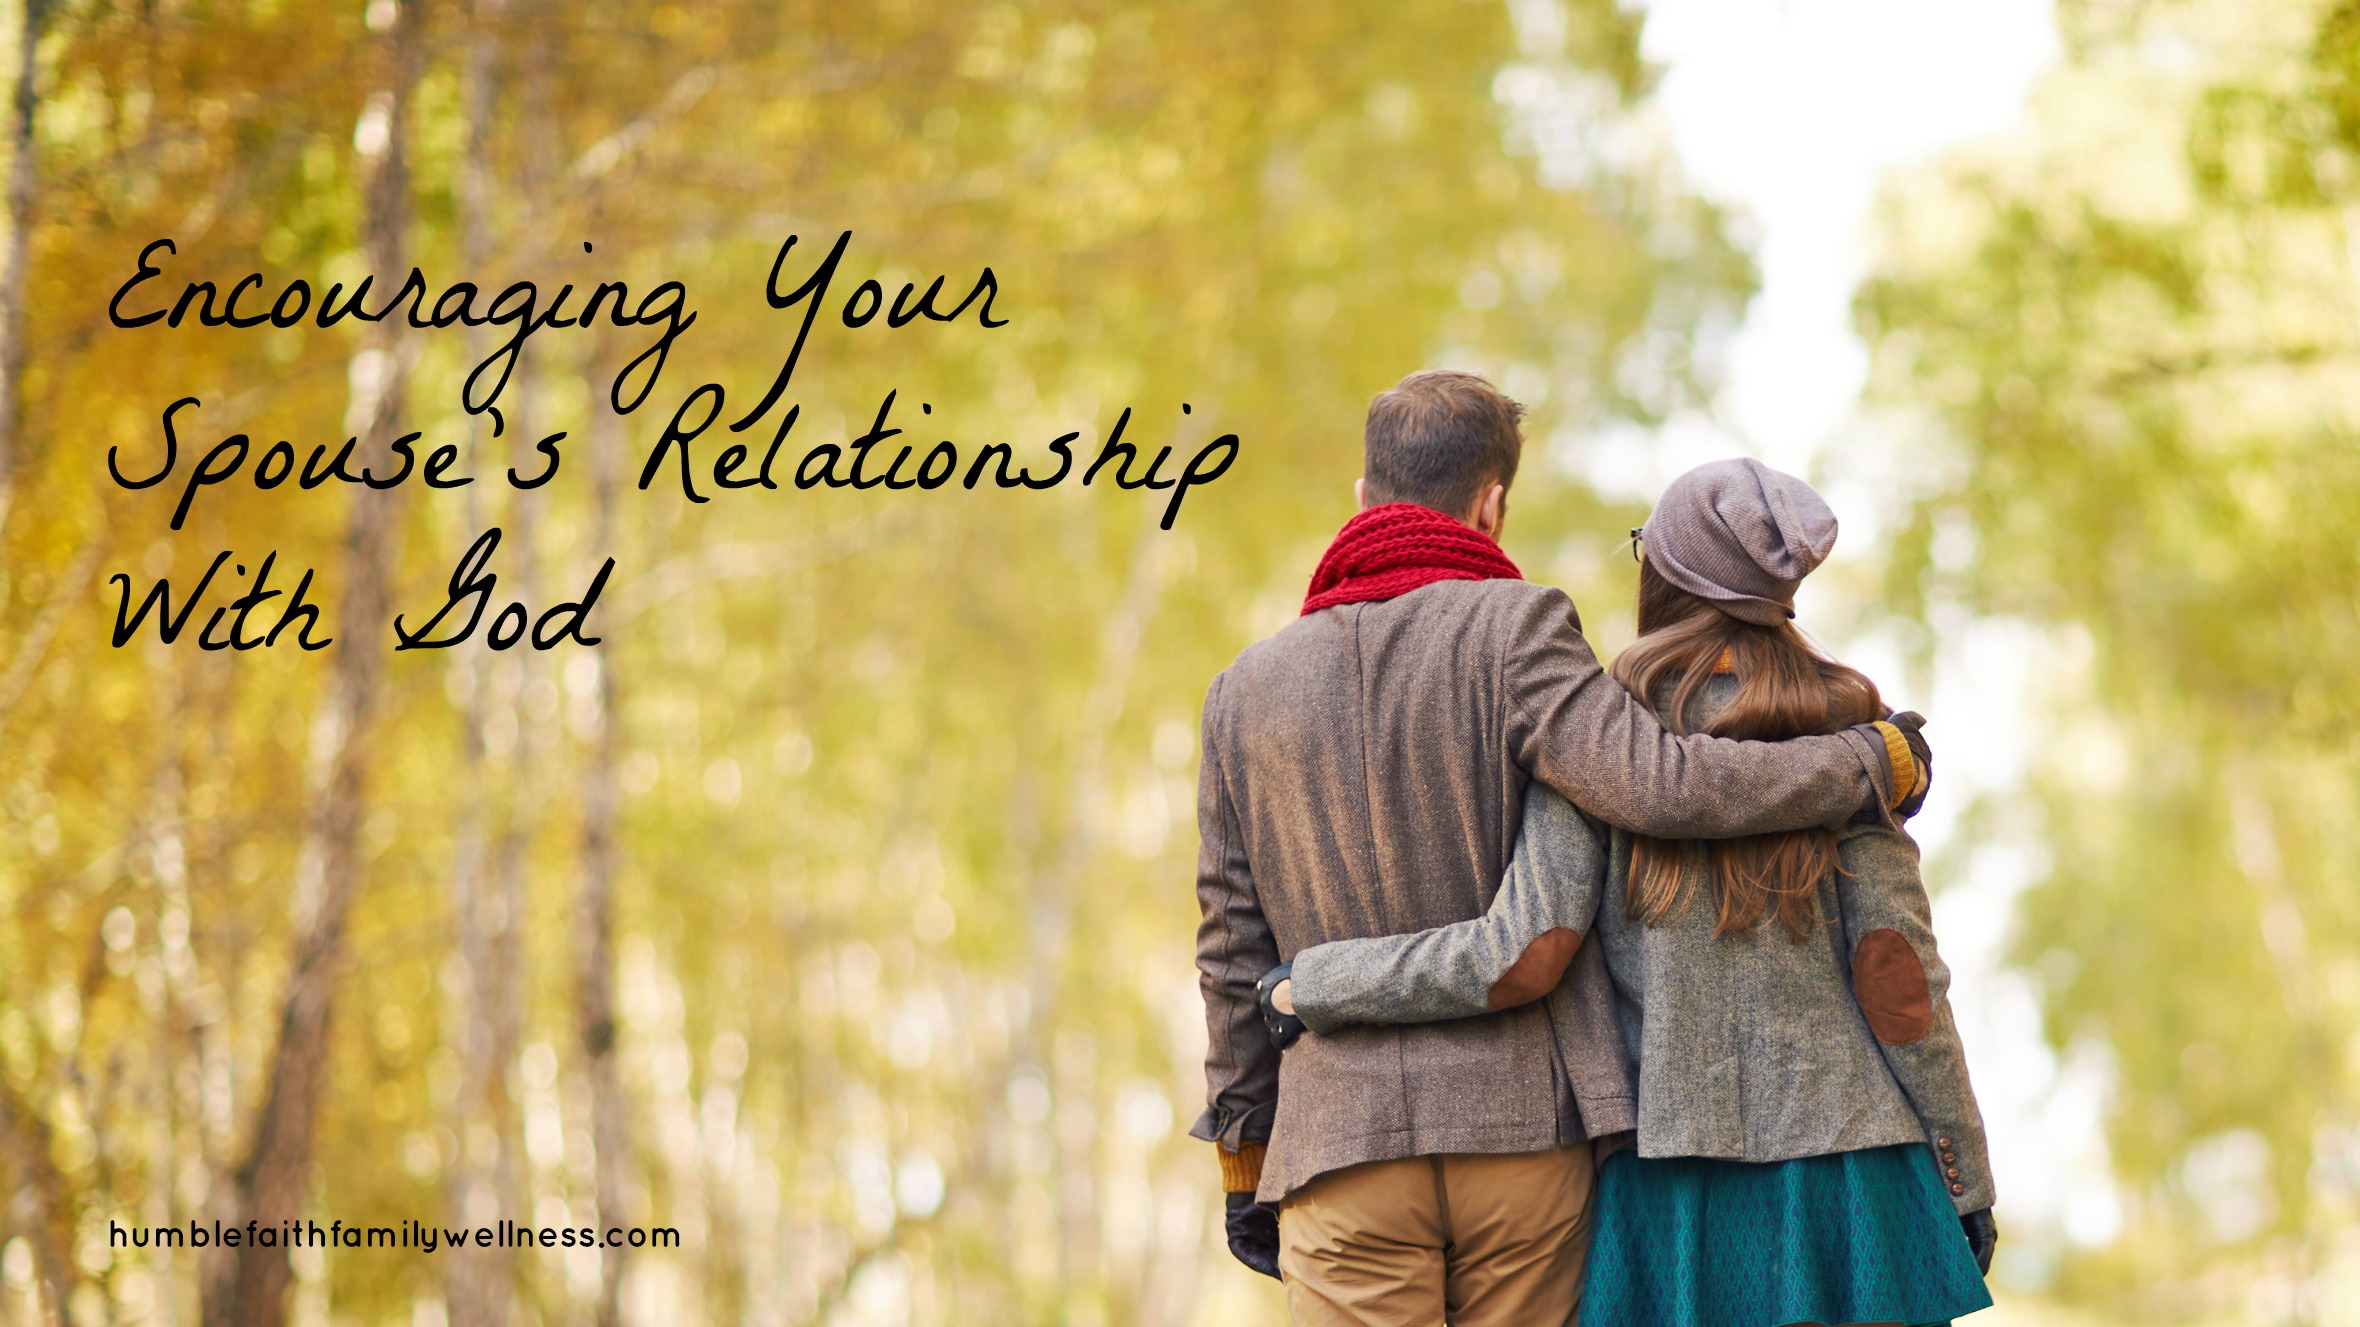 Encouraging Your Spouse's Relationship With God